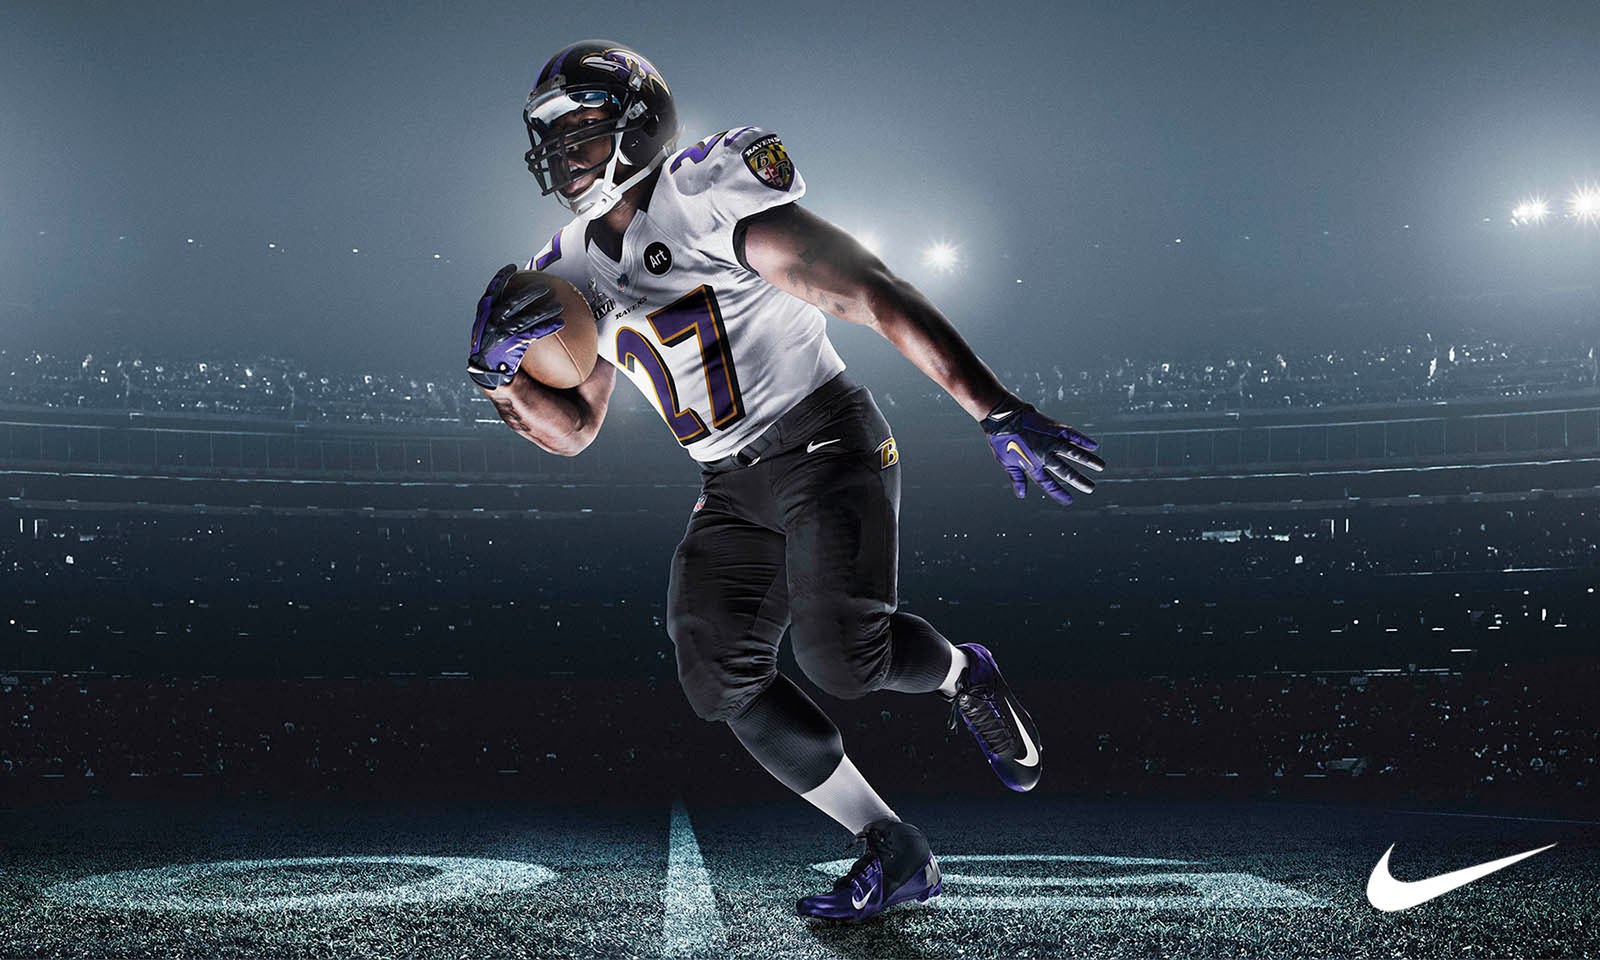 Nfl Football Players Wallpapers Nfl player ray rice hd 1600x960